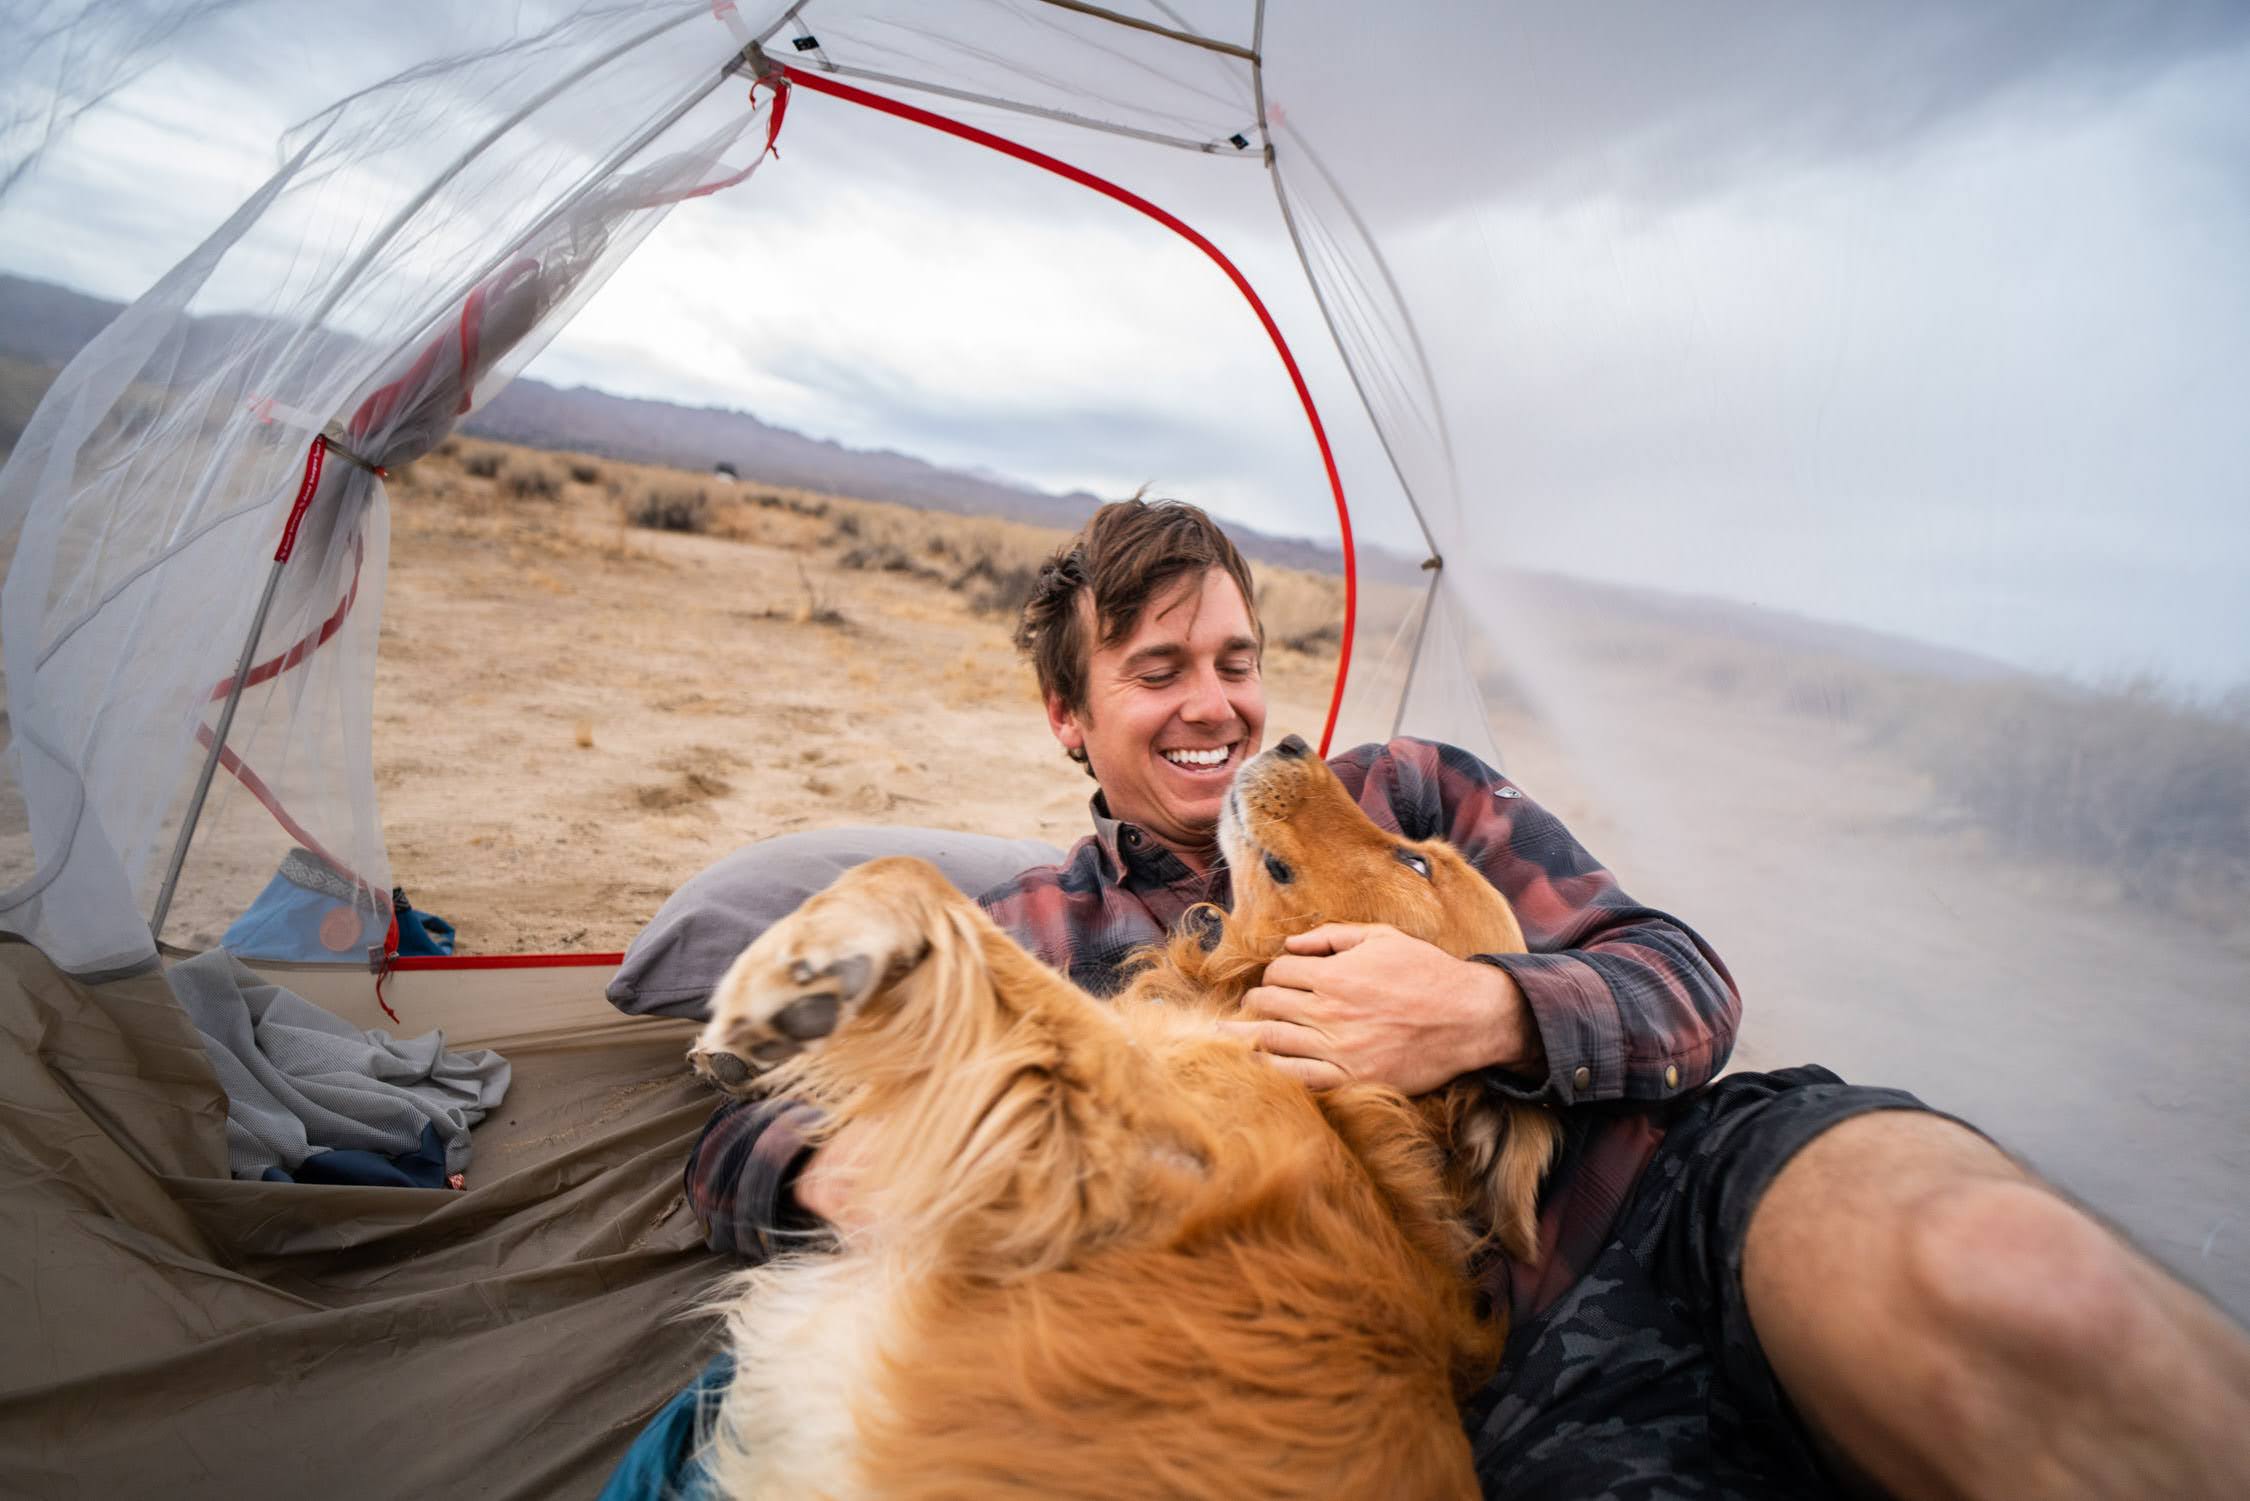 His dog is his camping partner!